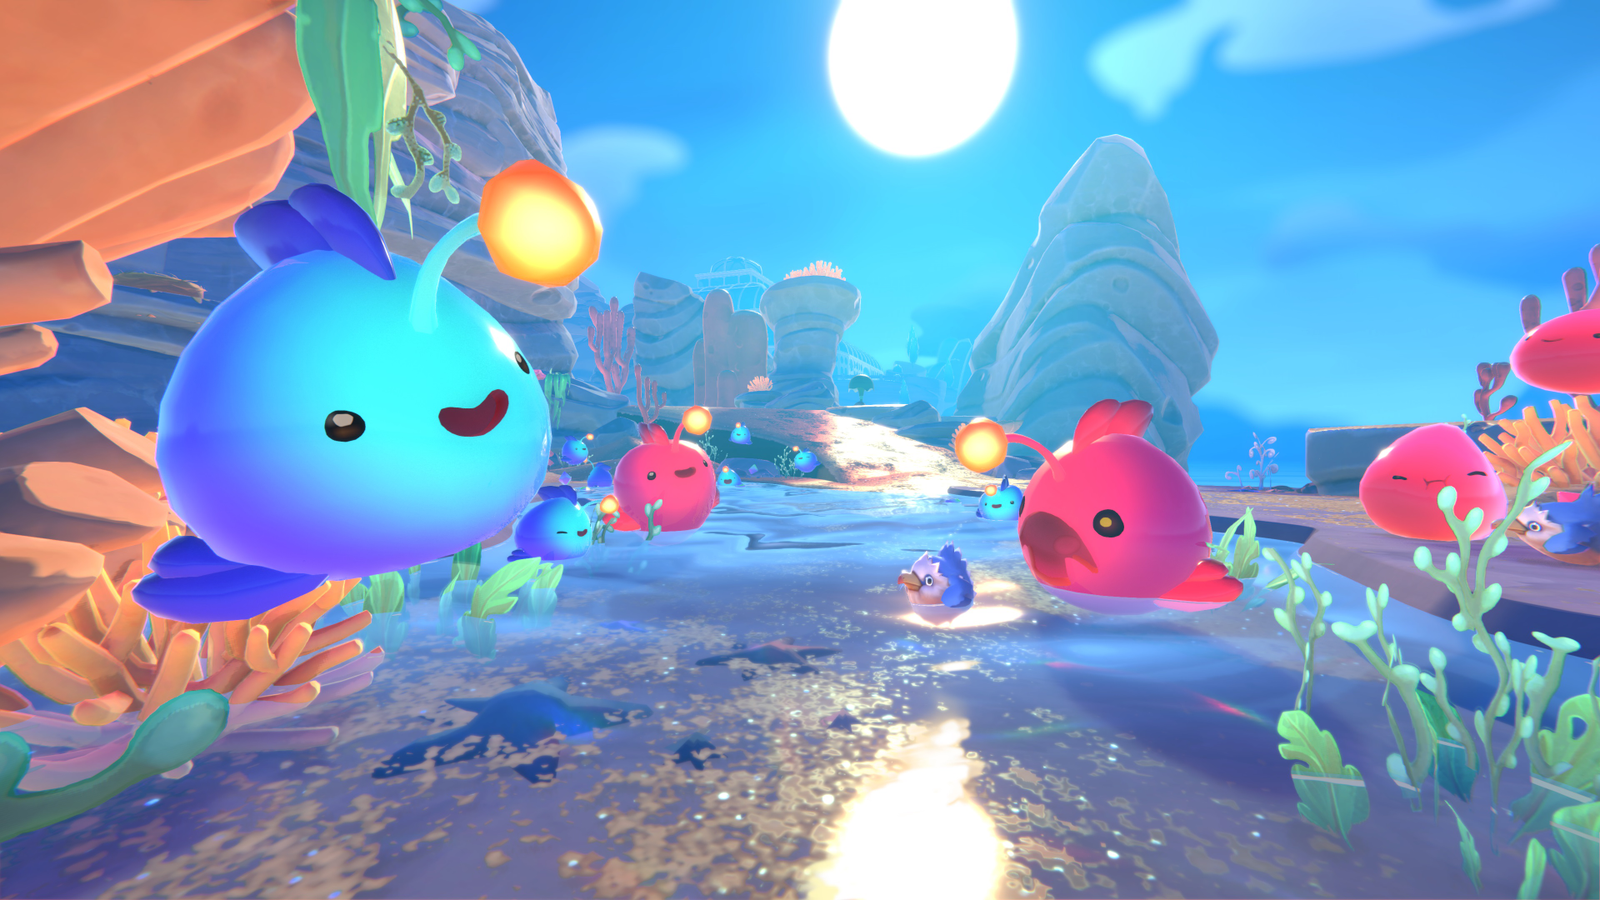 Slime Rancher 2 will be bigger and even more colourful than the